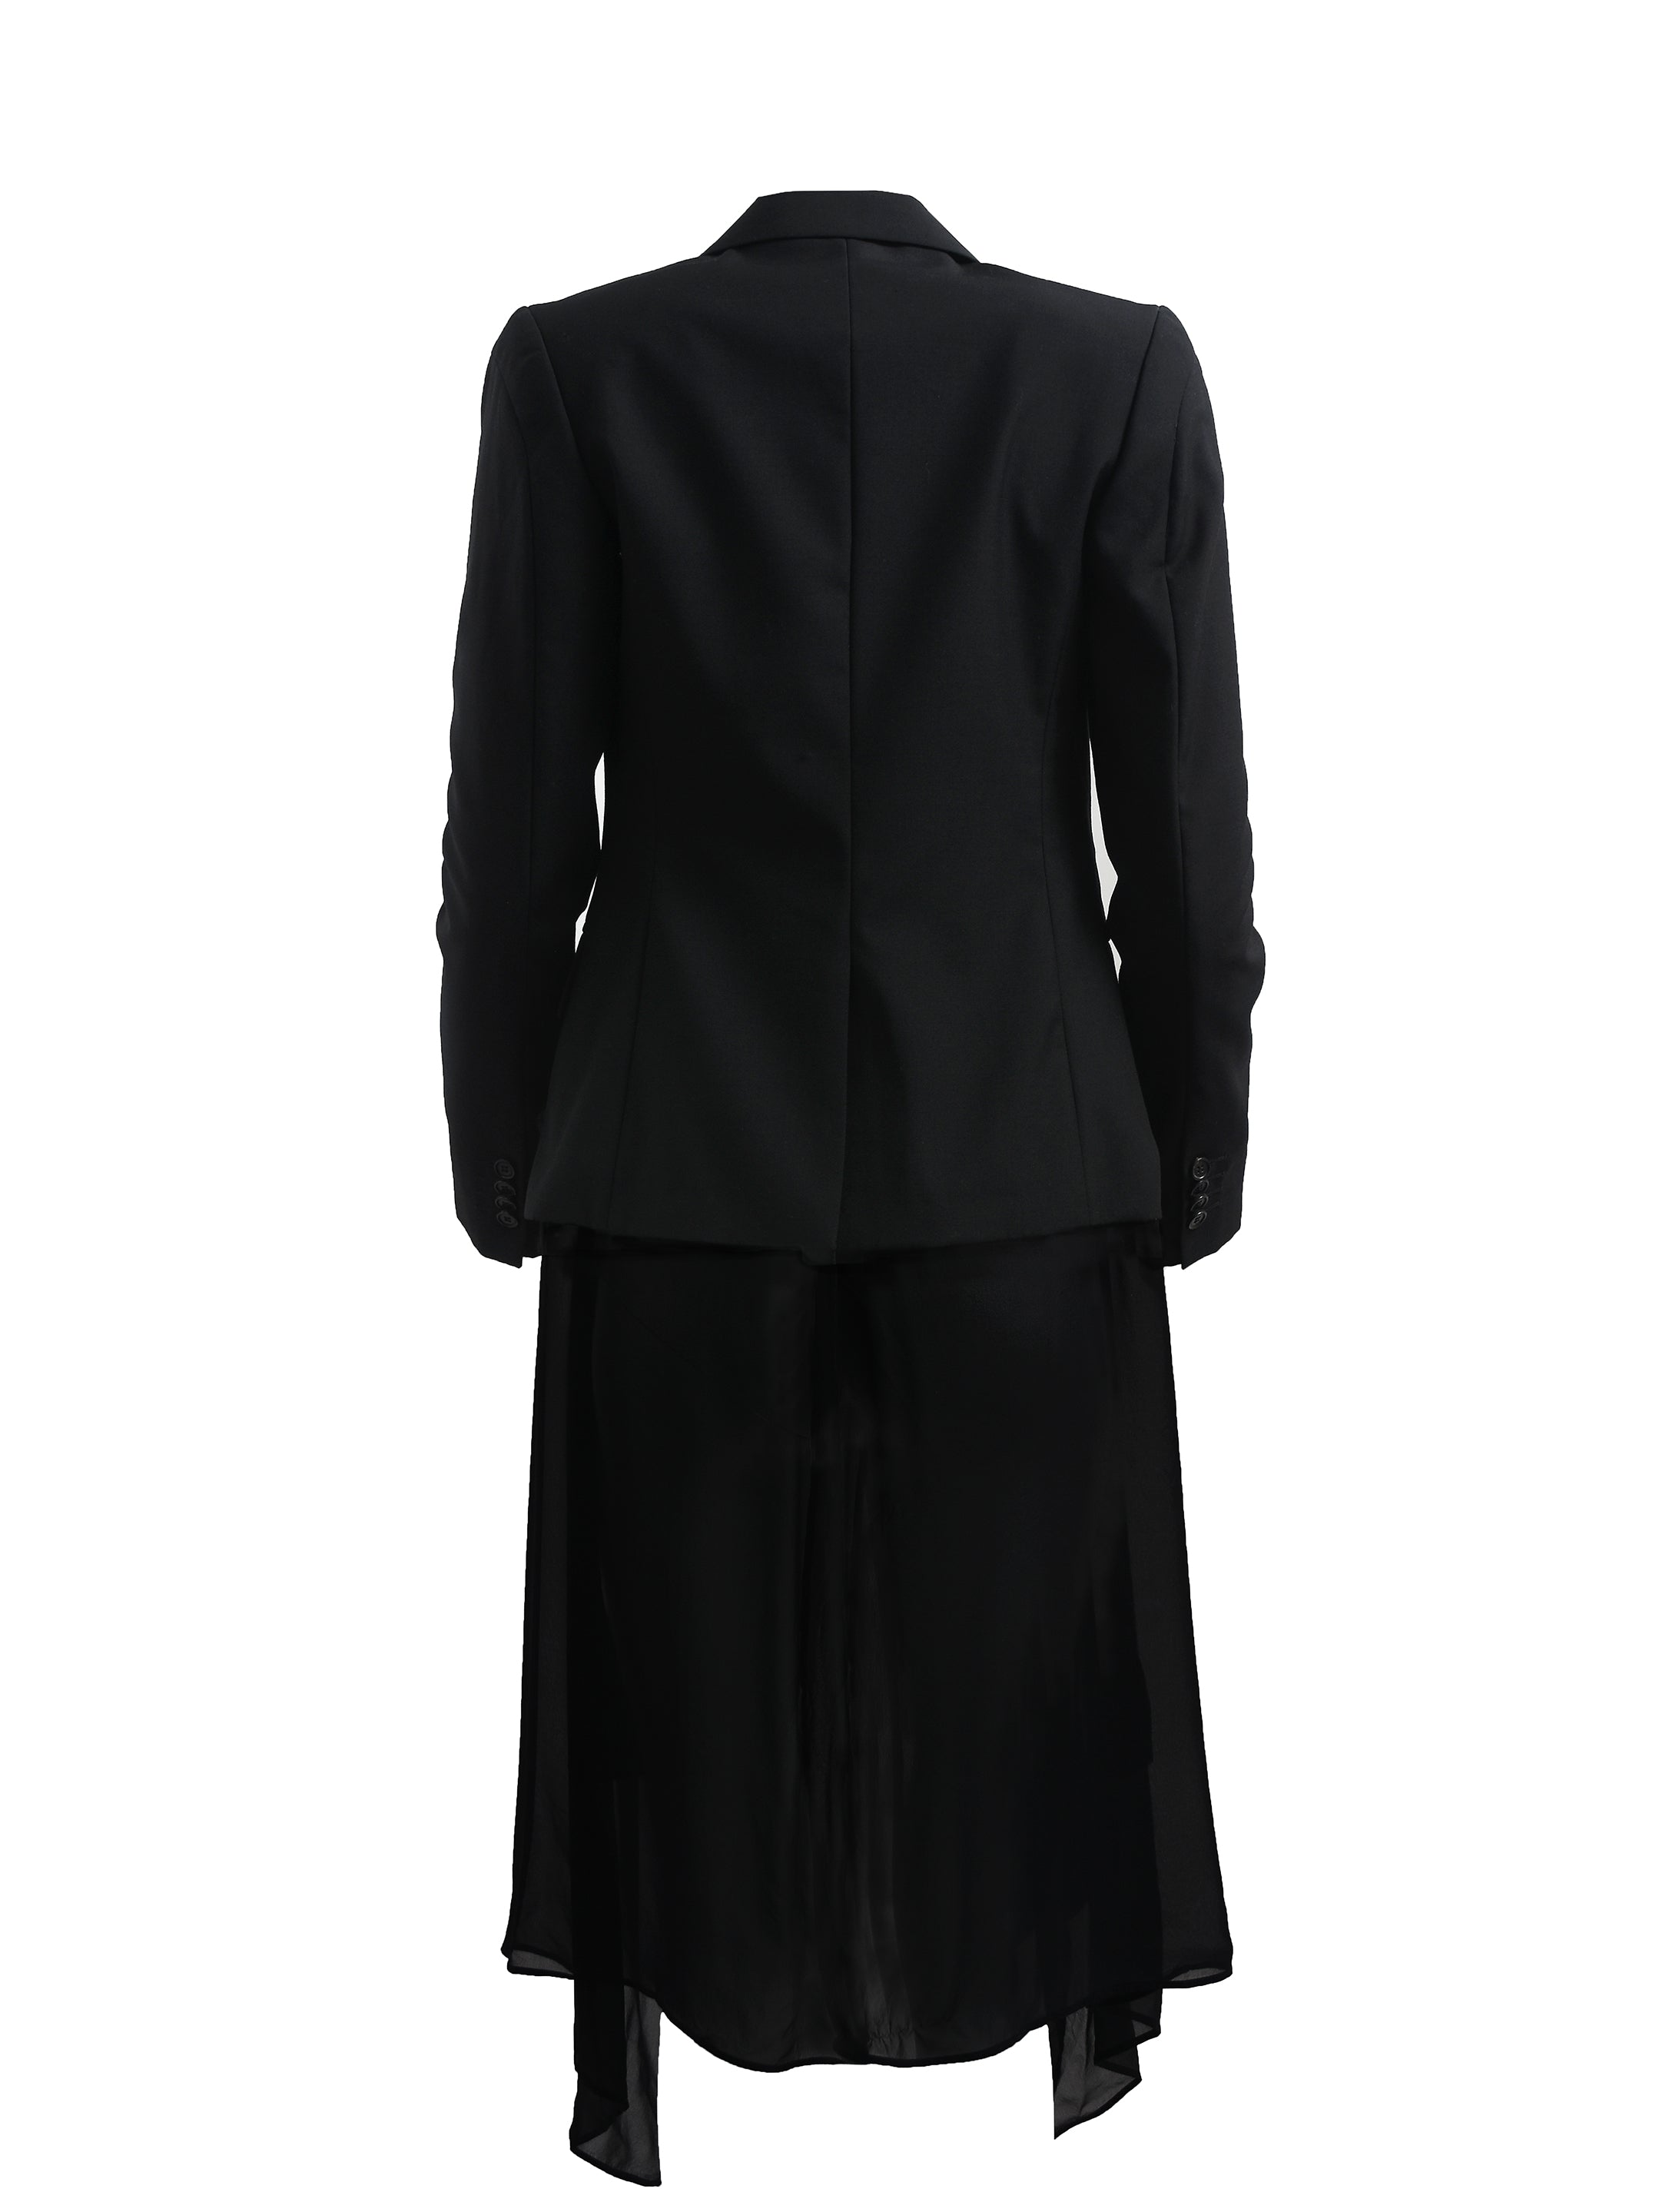 WOMENS BLACK SUIT JACKET WITH SILK DRAPING